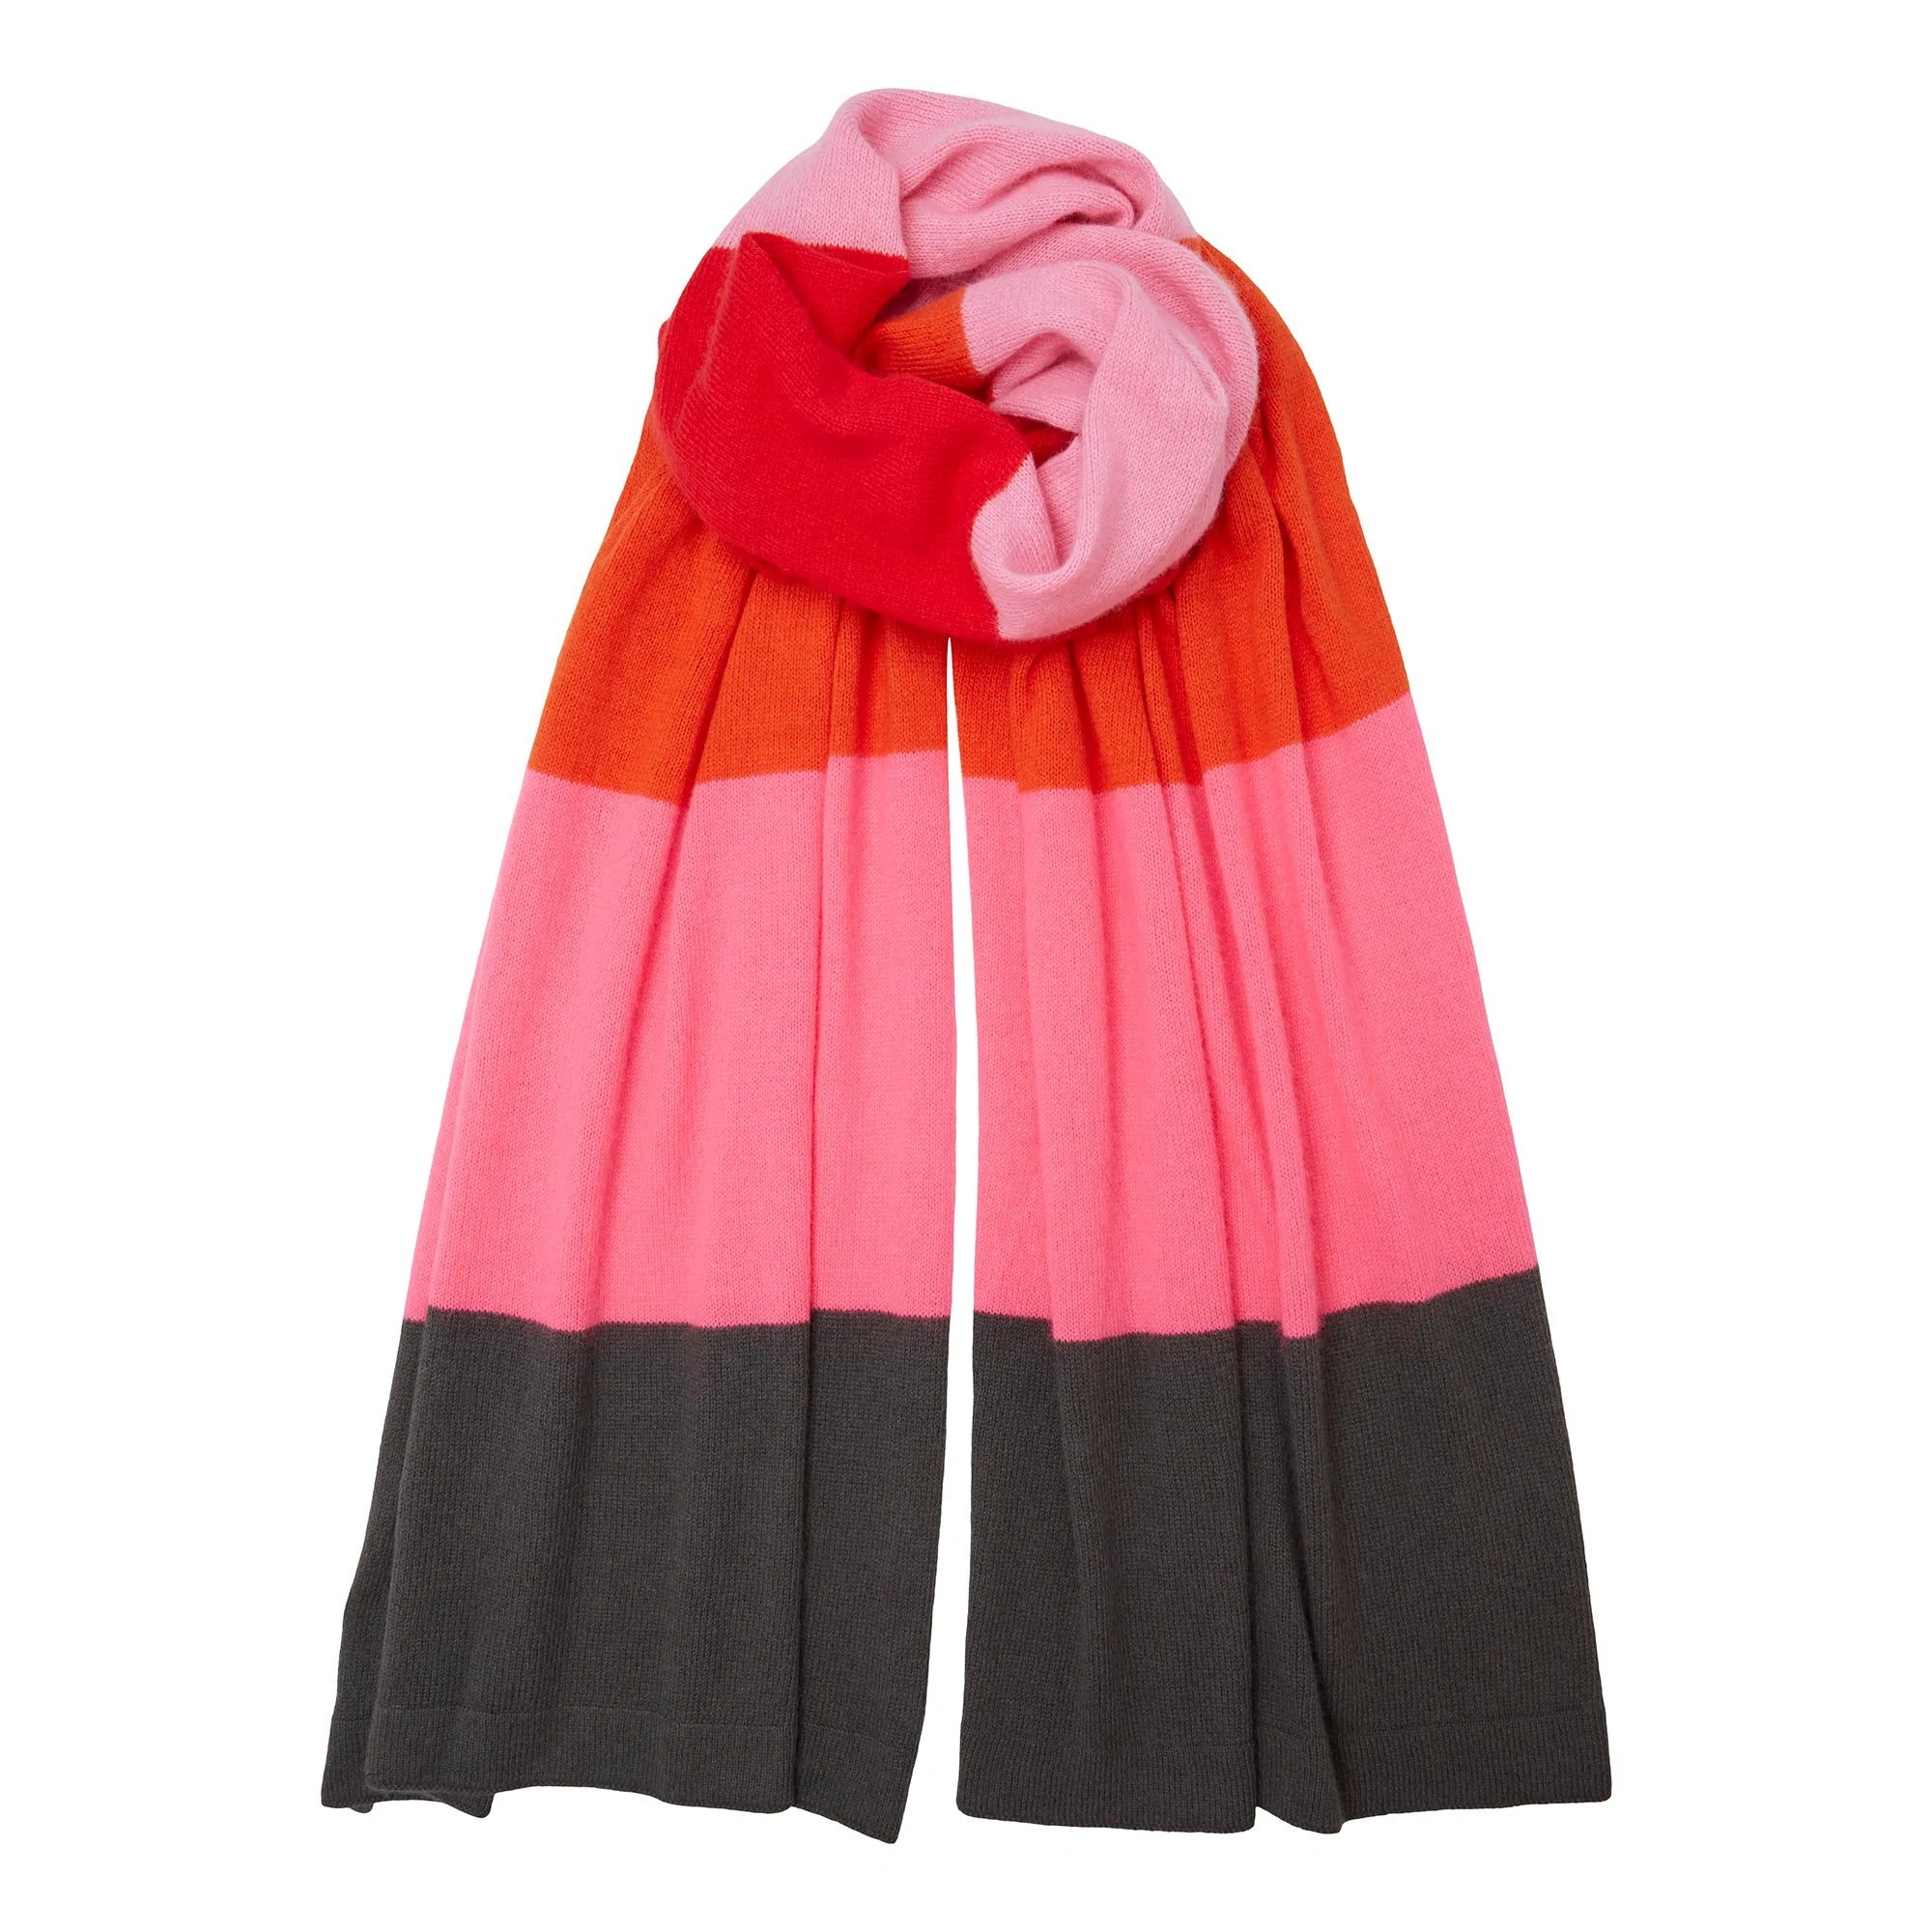 Oblong 100% cashmere striped scarf in pink orange red and grey